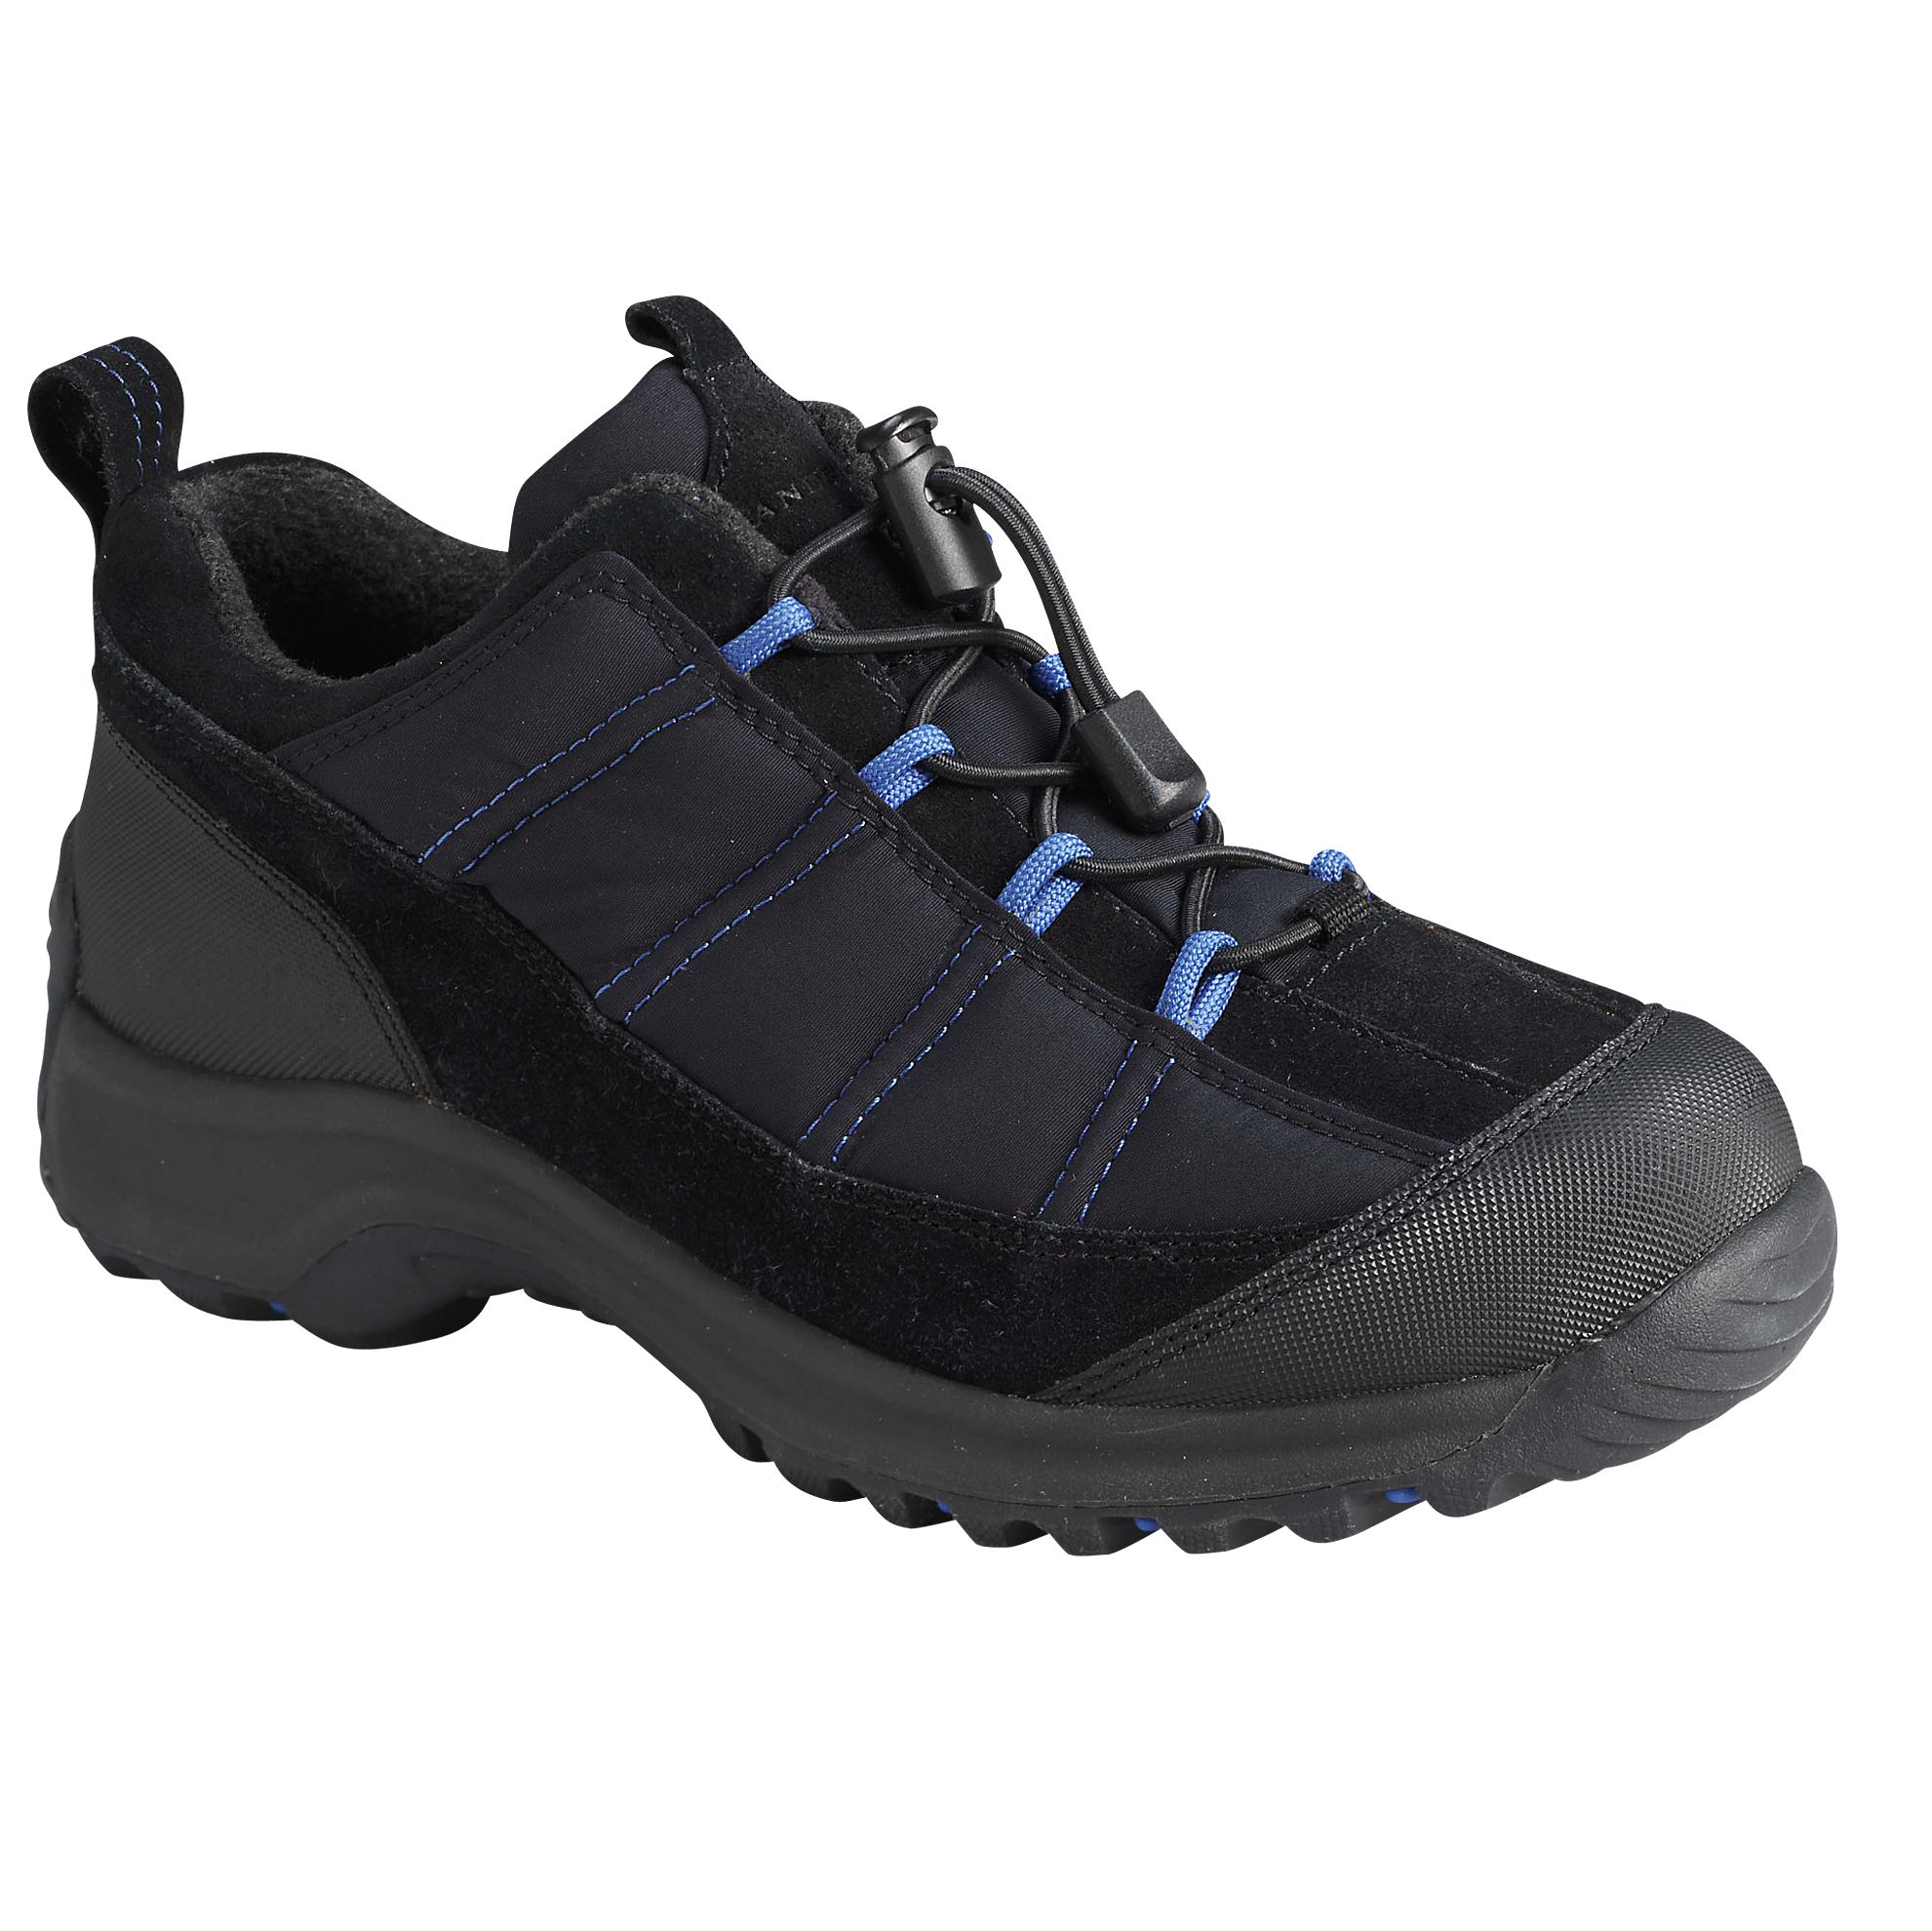 Lands' End Mens Extreme Squall Shoes